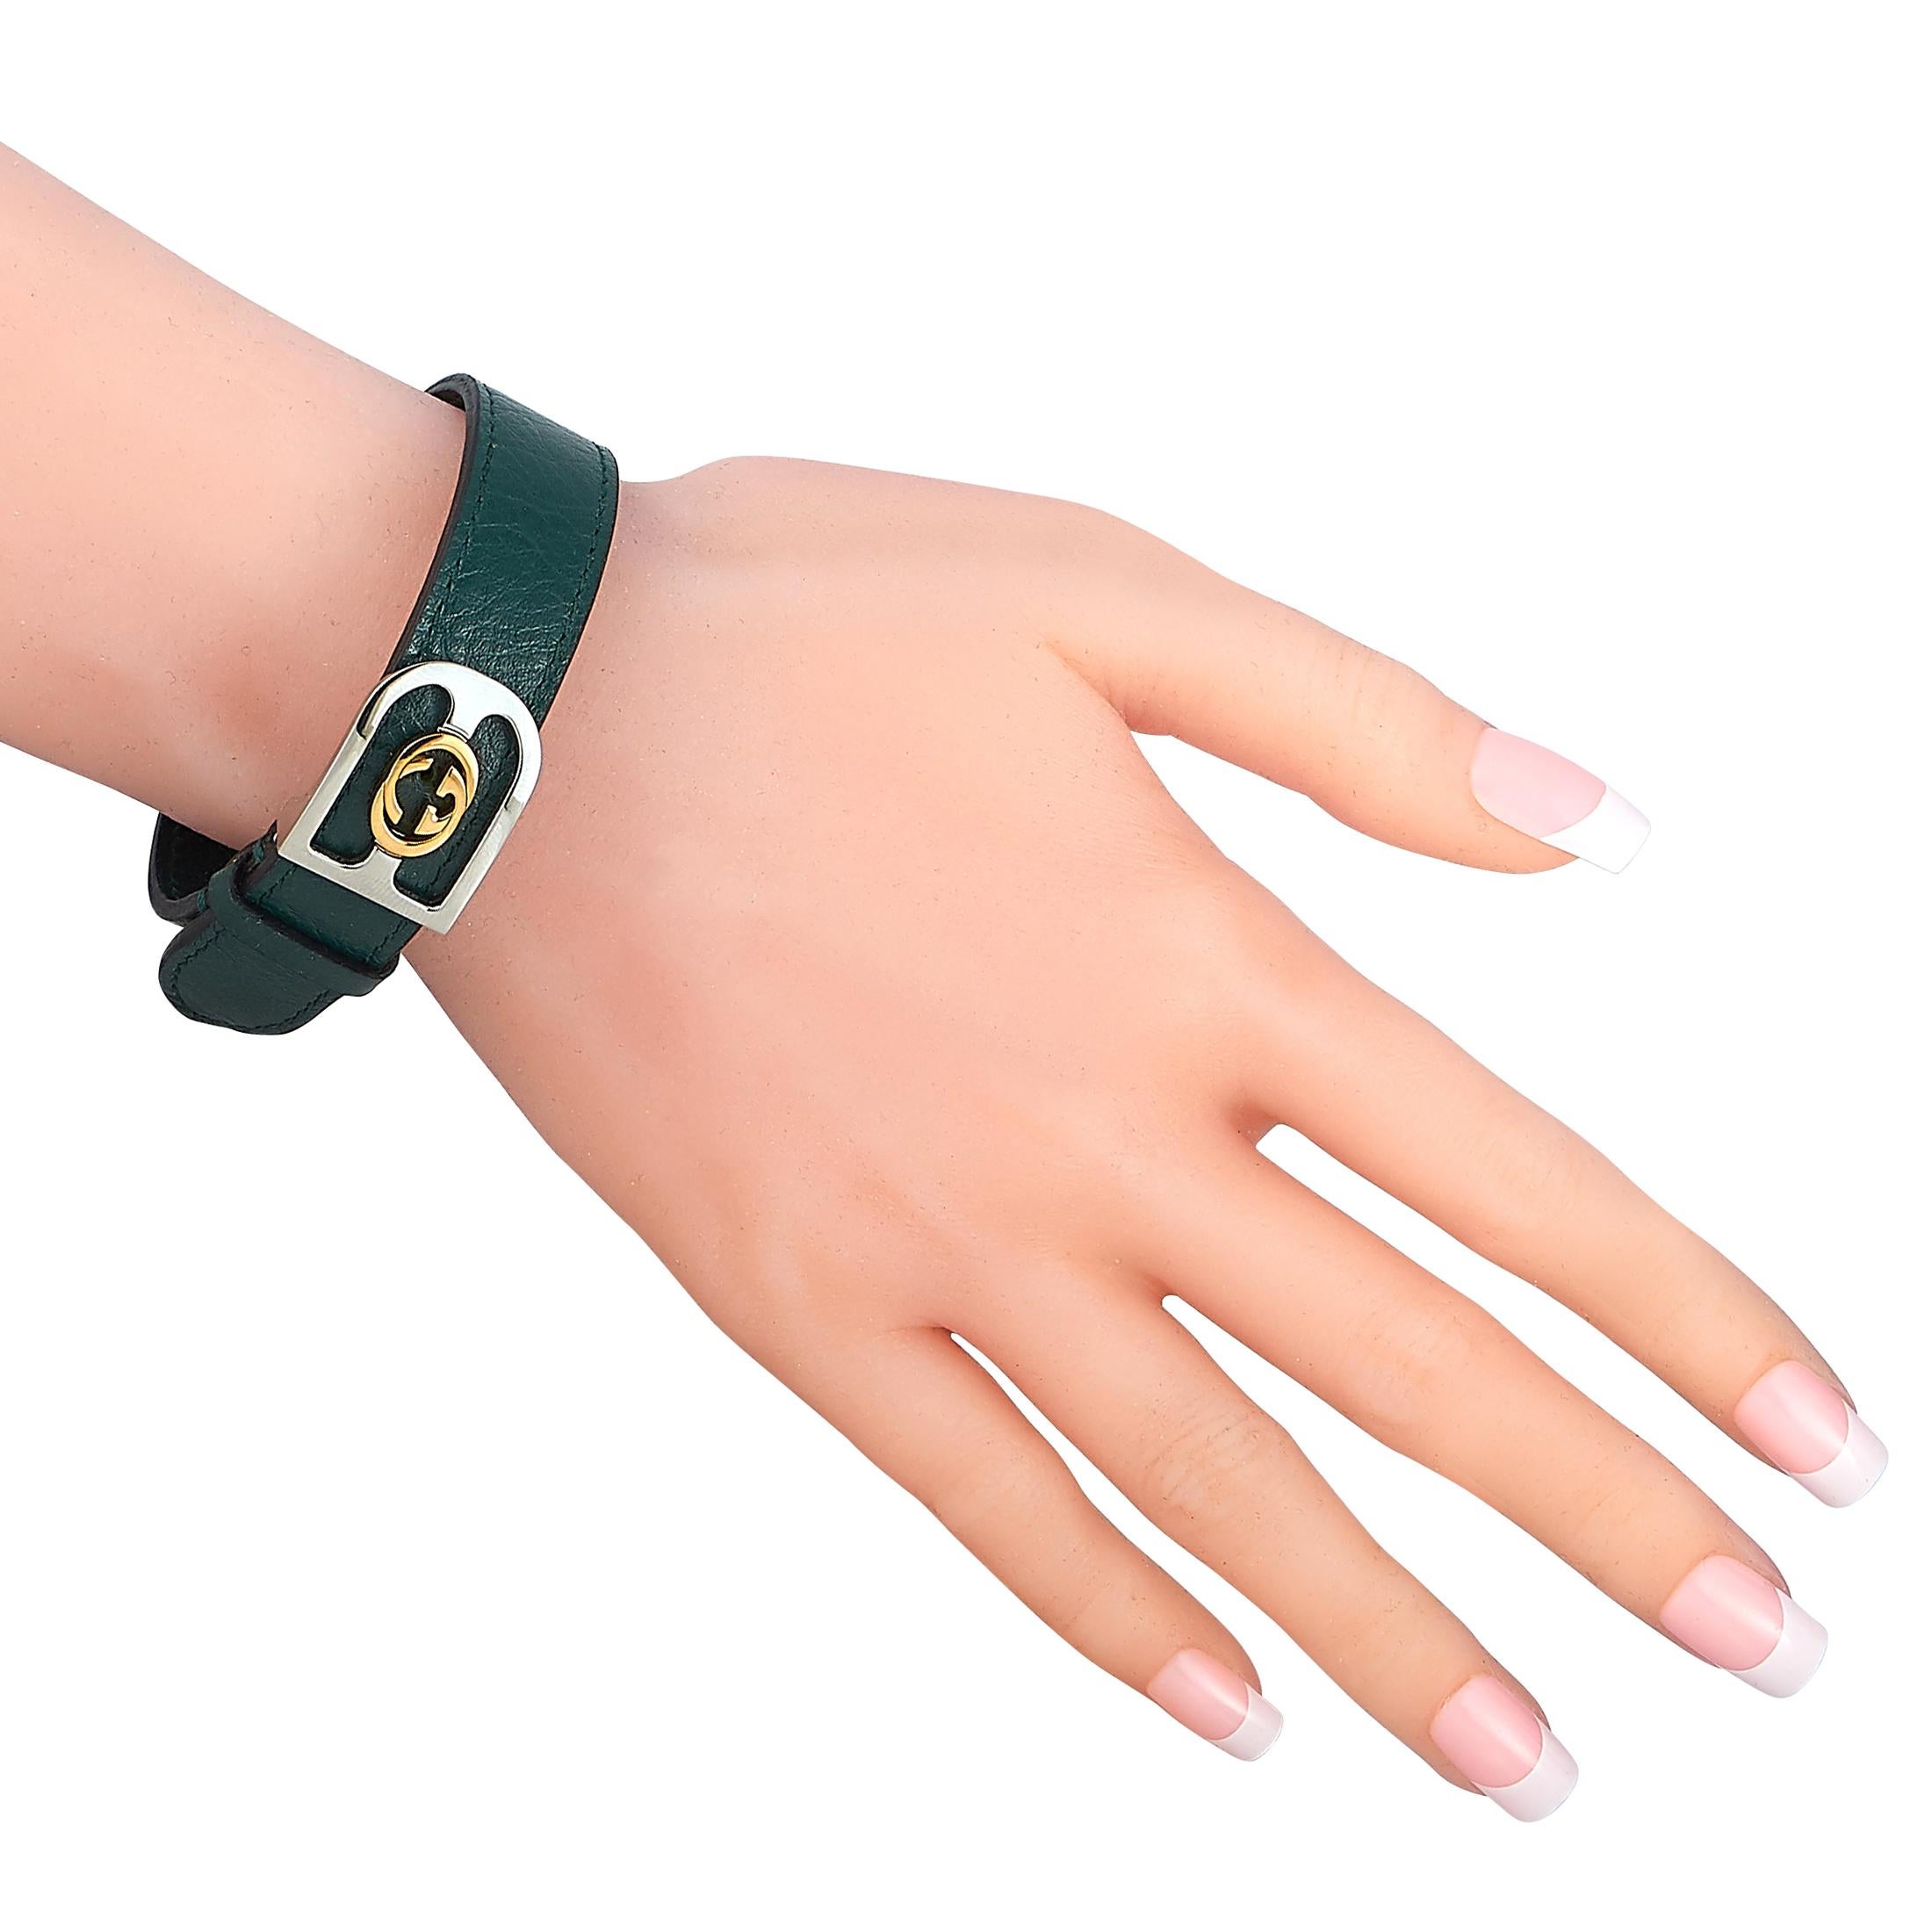 This Gucci bracelet is made of green azalea leather and fitted with an 18K yellow gold and stainless steel deployment clasp, accentuated with the iconic Interlocking G logo. The bracelet weighs 17.3 grams and measures 8” in length.

Offered in brand